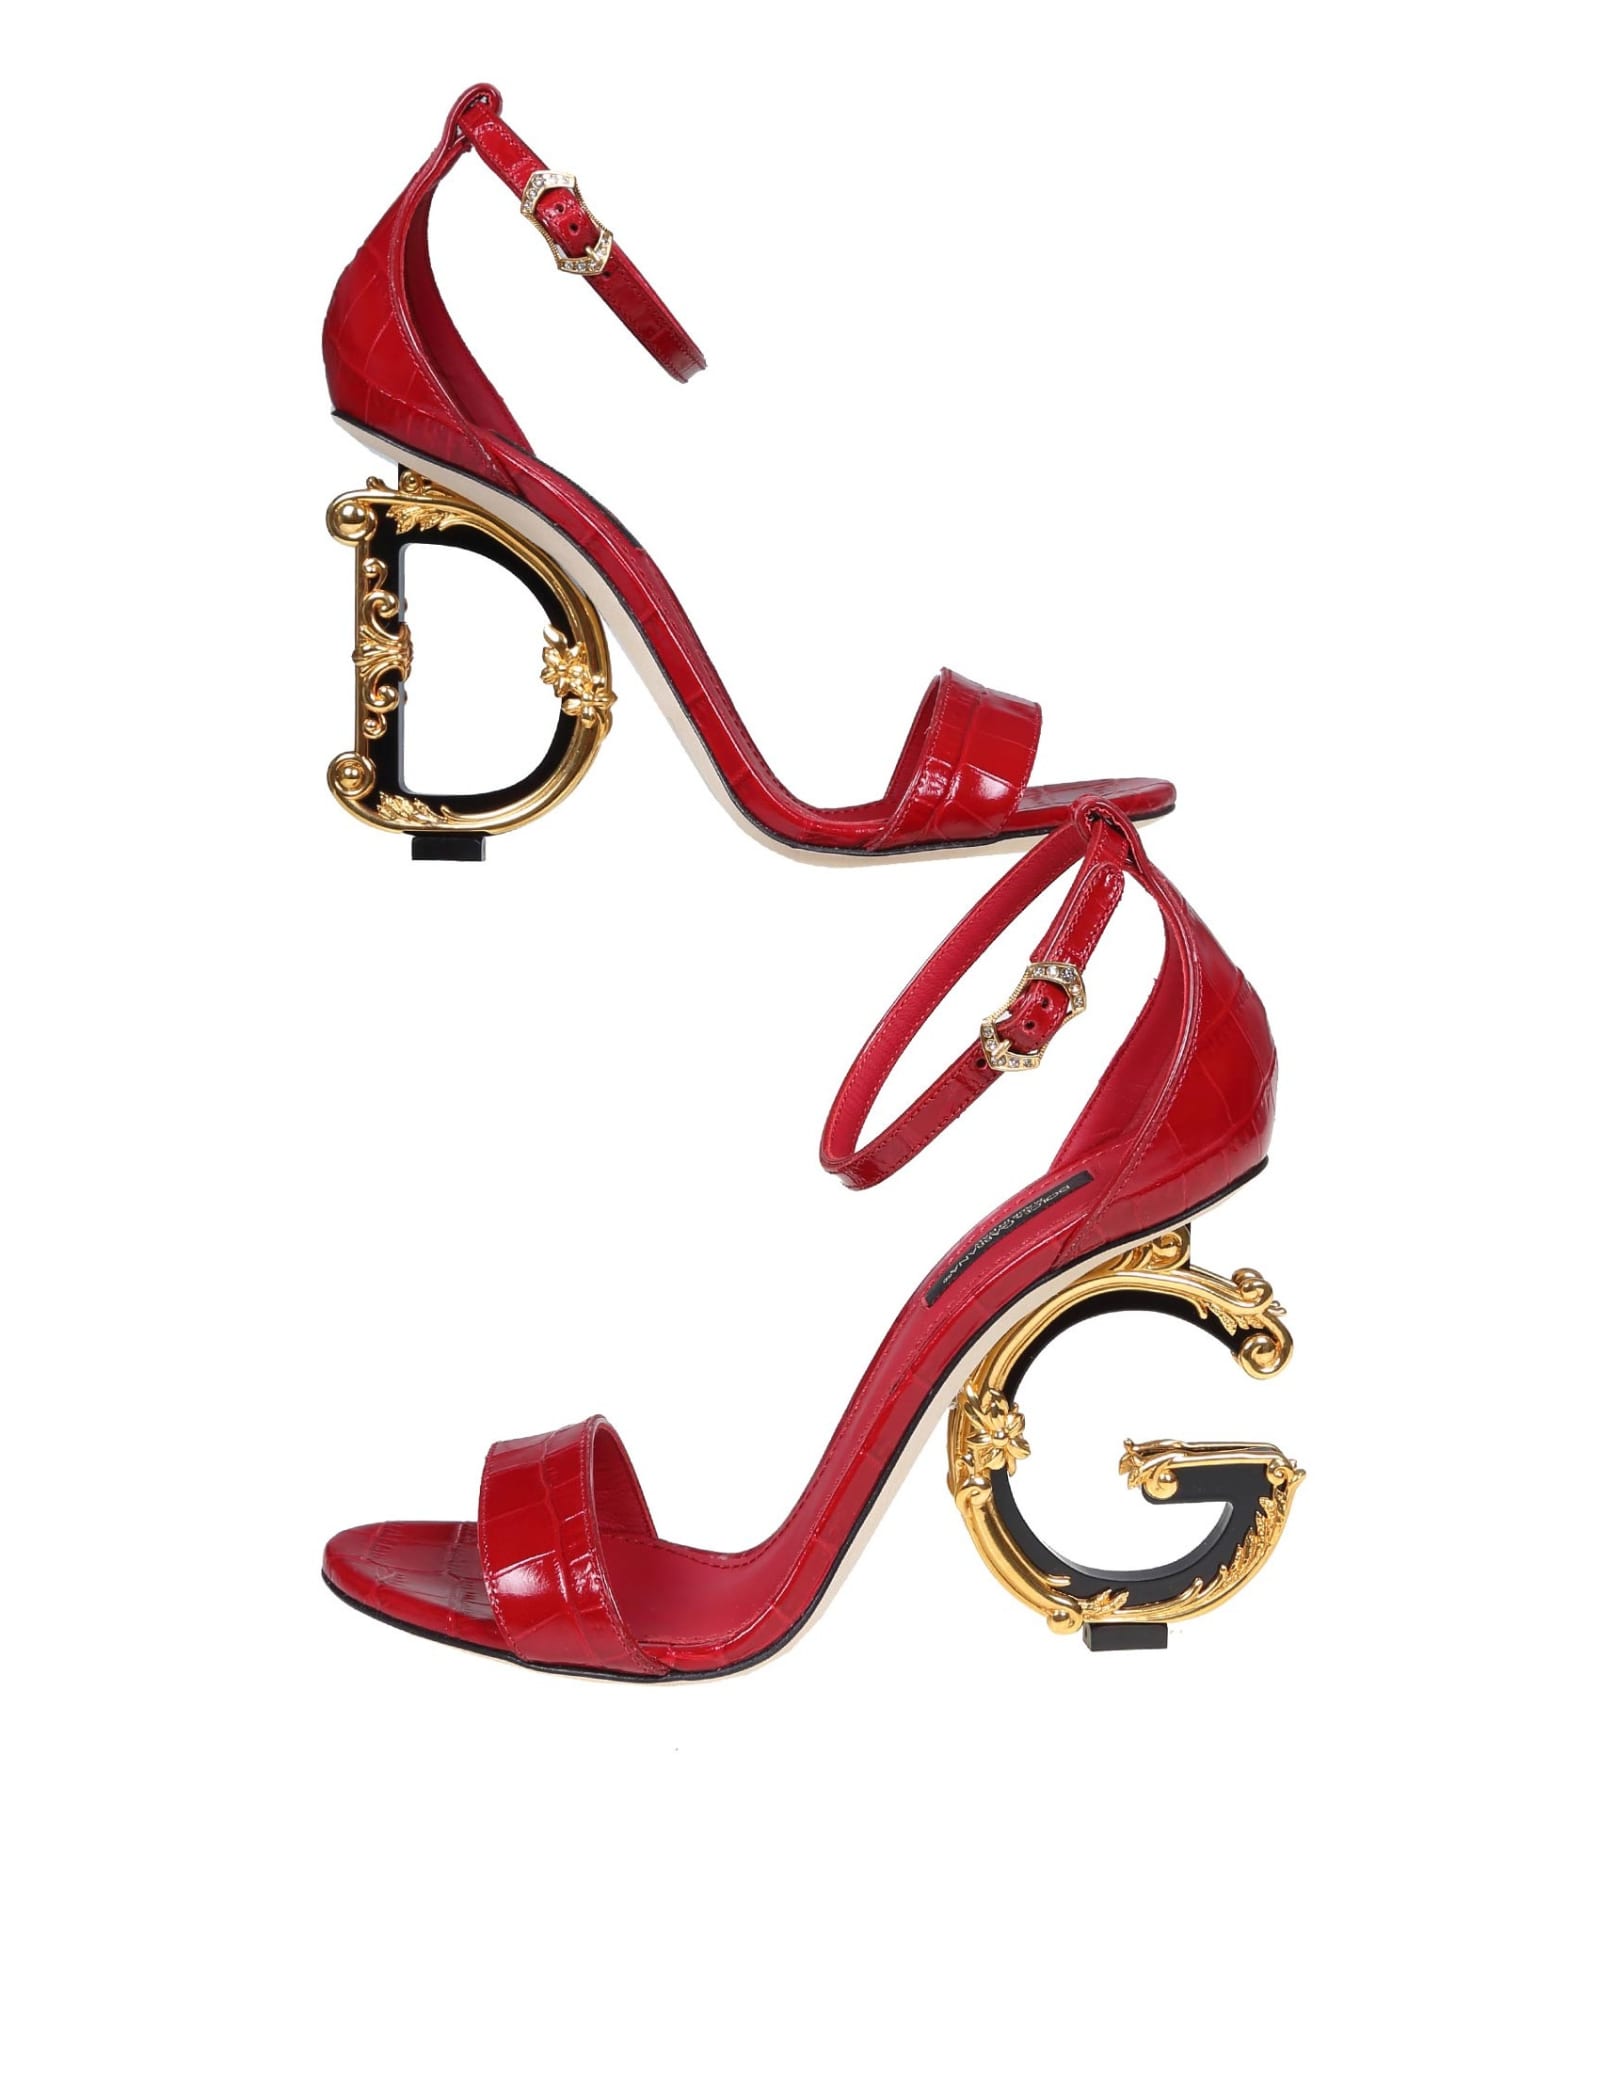 Dolce & Gabbana Devotion Sandal In Cherry Color Leather